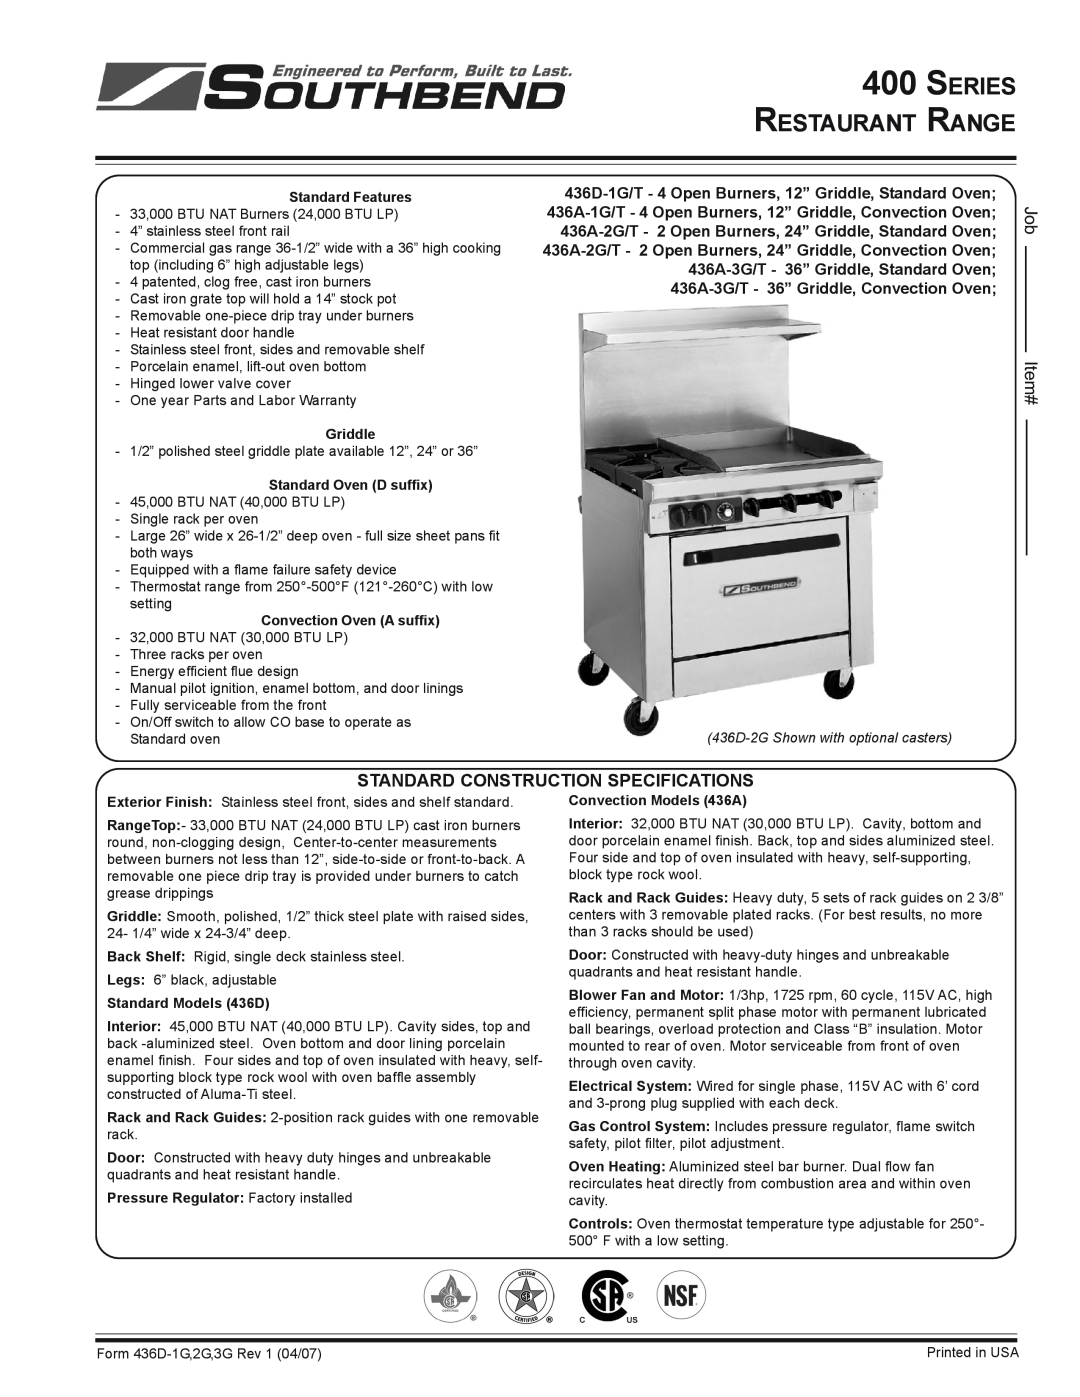 Southbend 400 series specifications Standard Construction Specifications, Series Restaurant Range, Job Item#, Griddle 